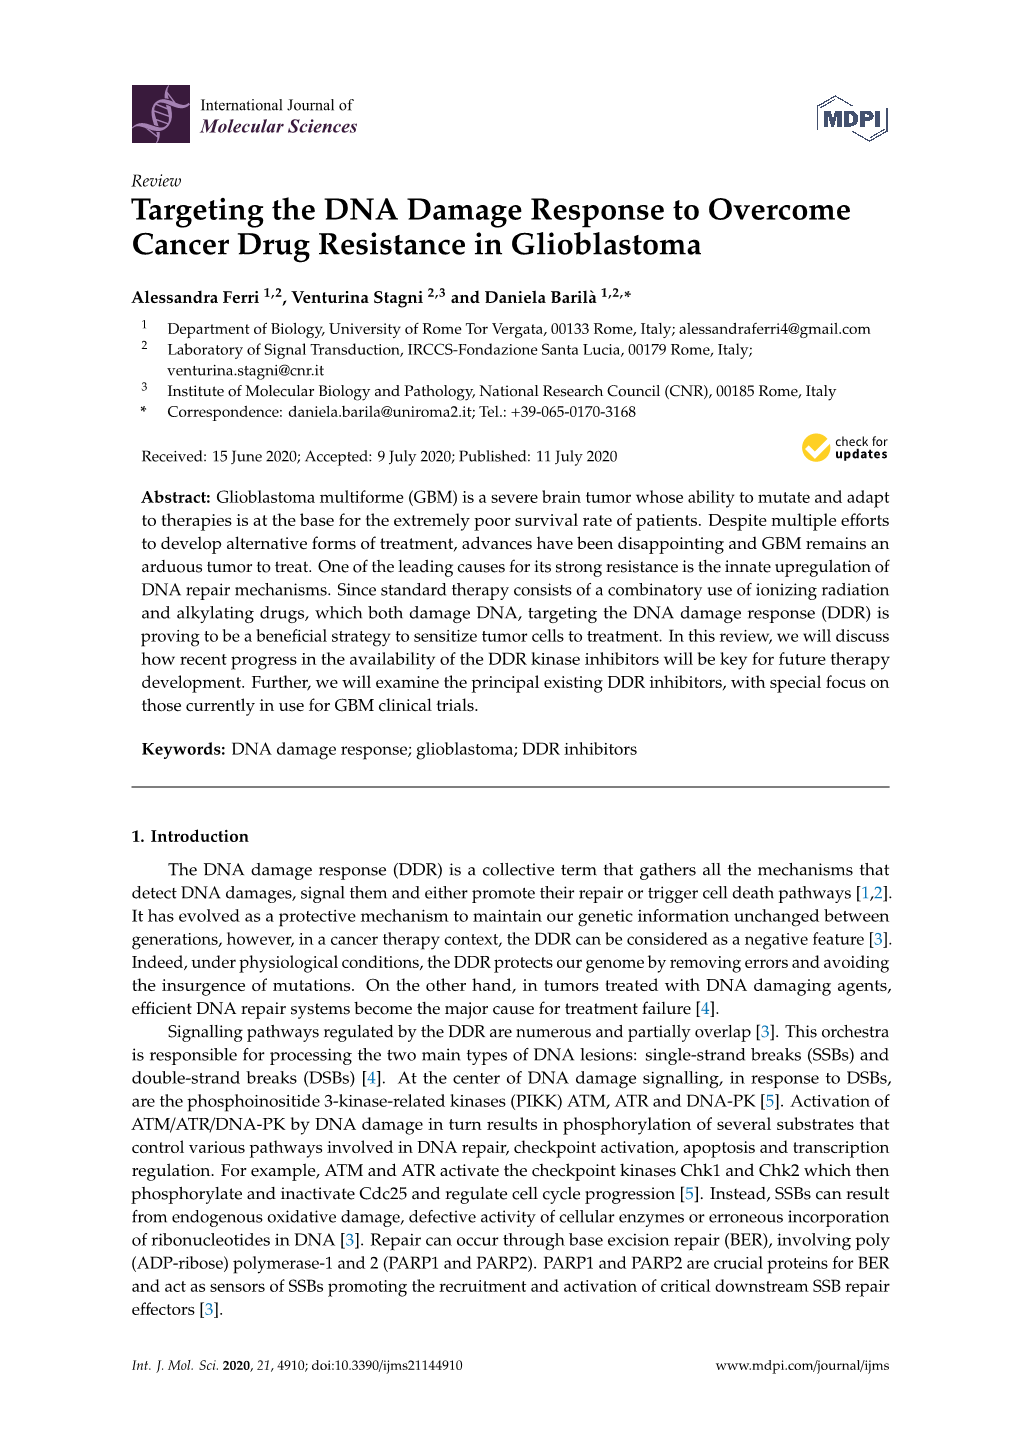 Targeting the DNA Damage Response to Overcome Cancer Drug Resistance in Glioblastoma